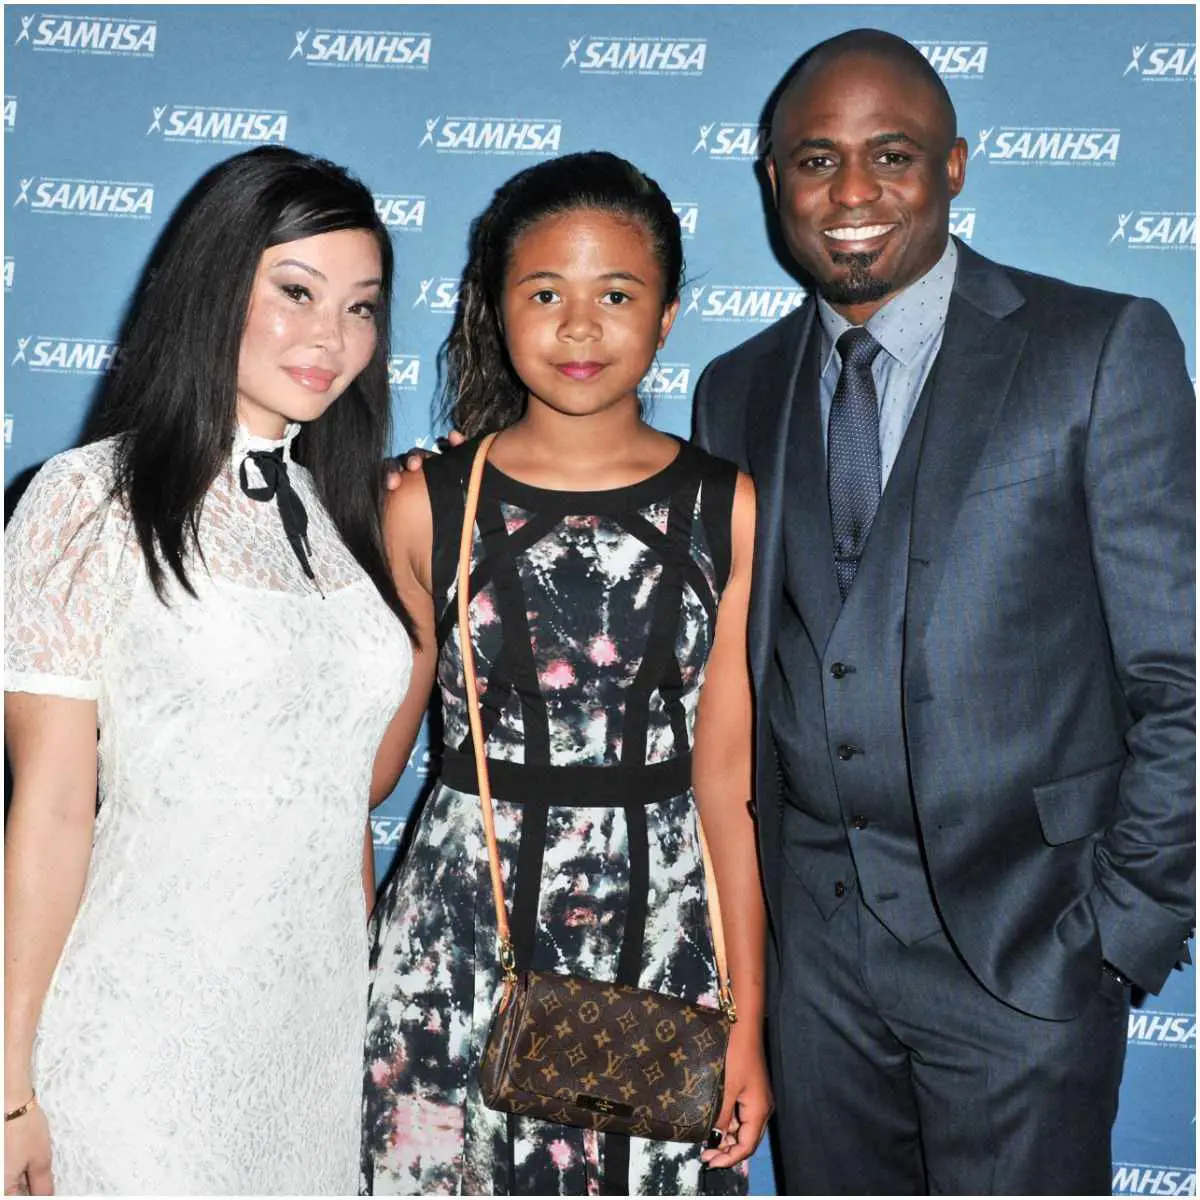 Wayne Brady with his ex-wife and daughter